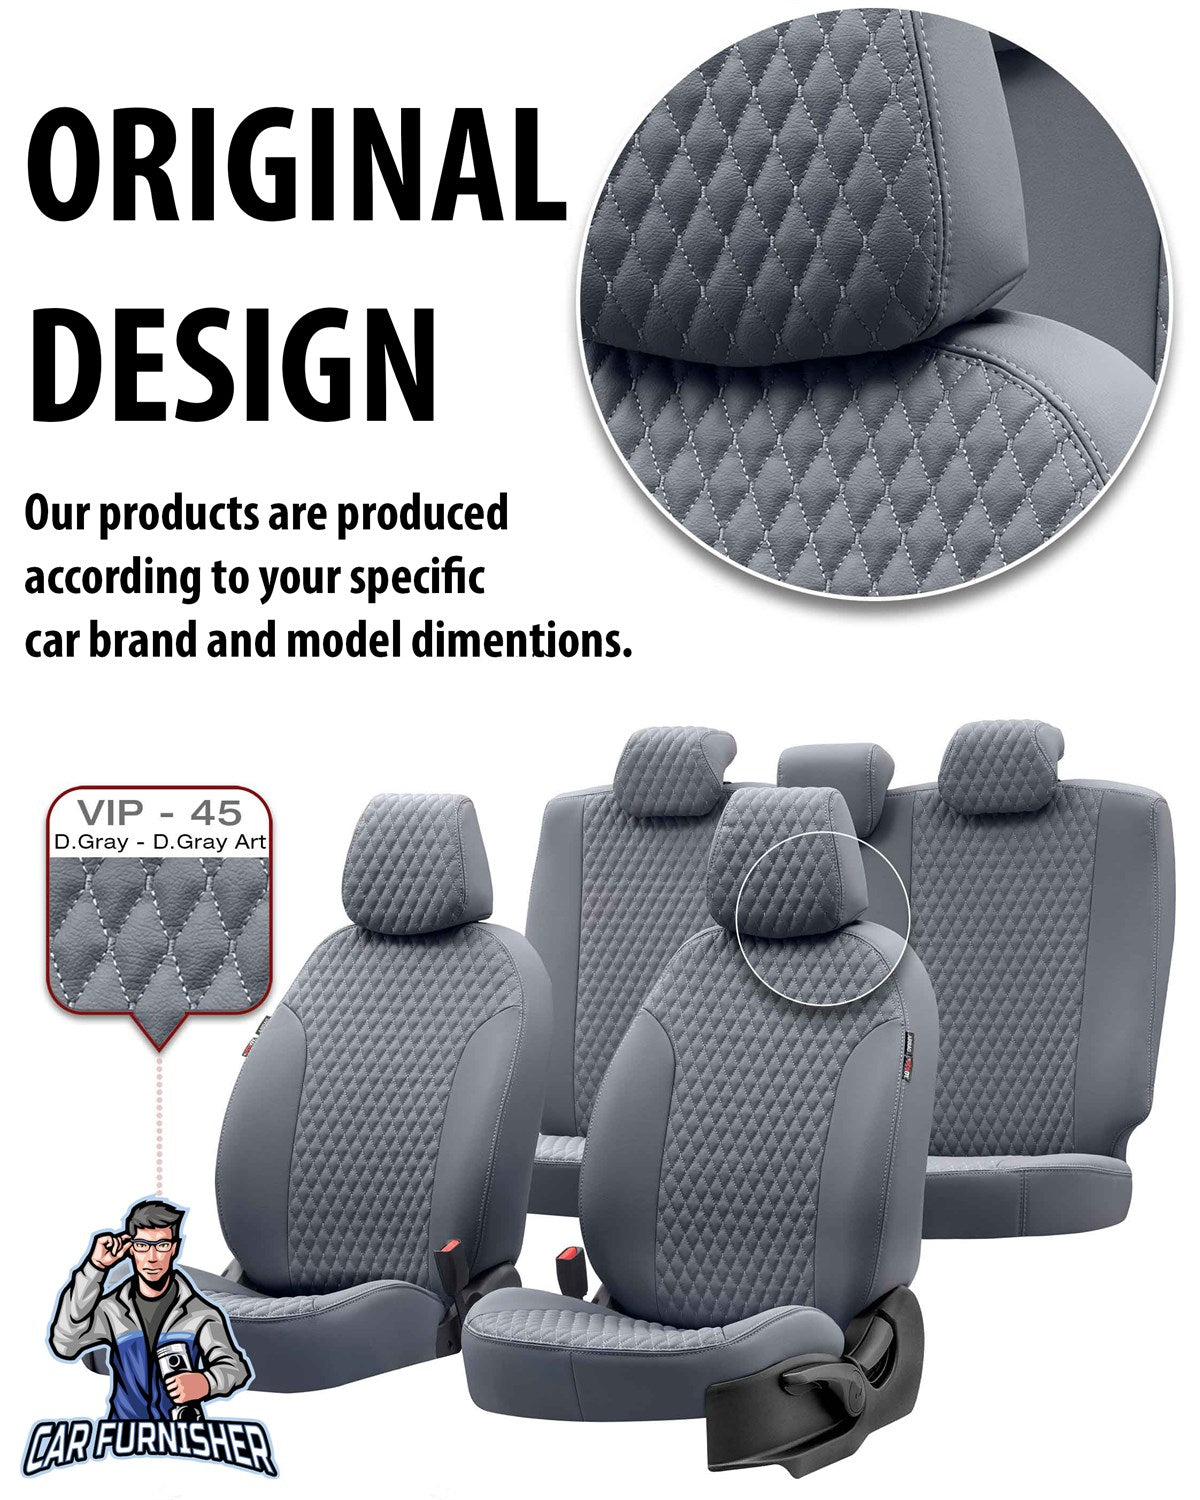 Ssangyong Tivoli Seat Covers Amsterdam Leather Design Smoked Black Leather